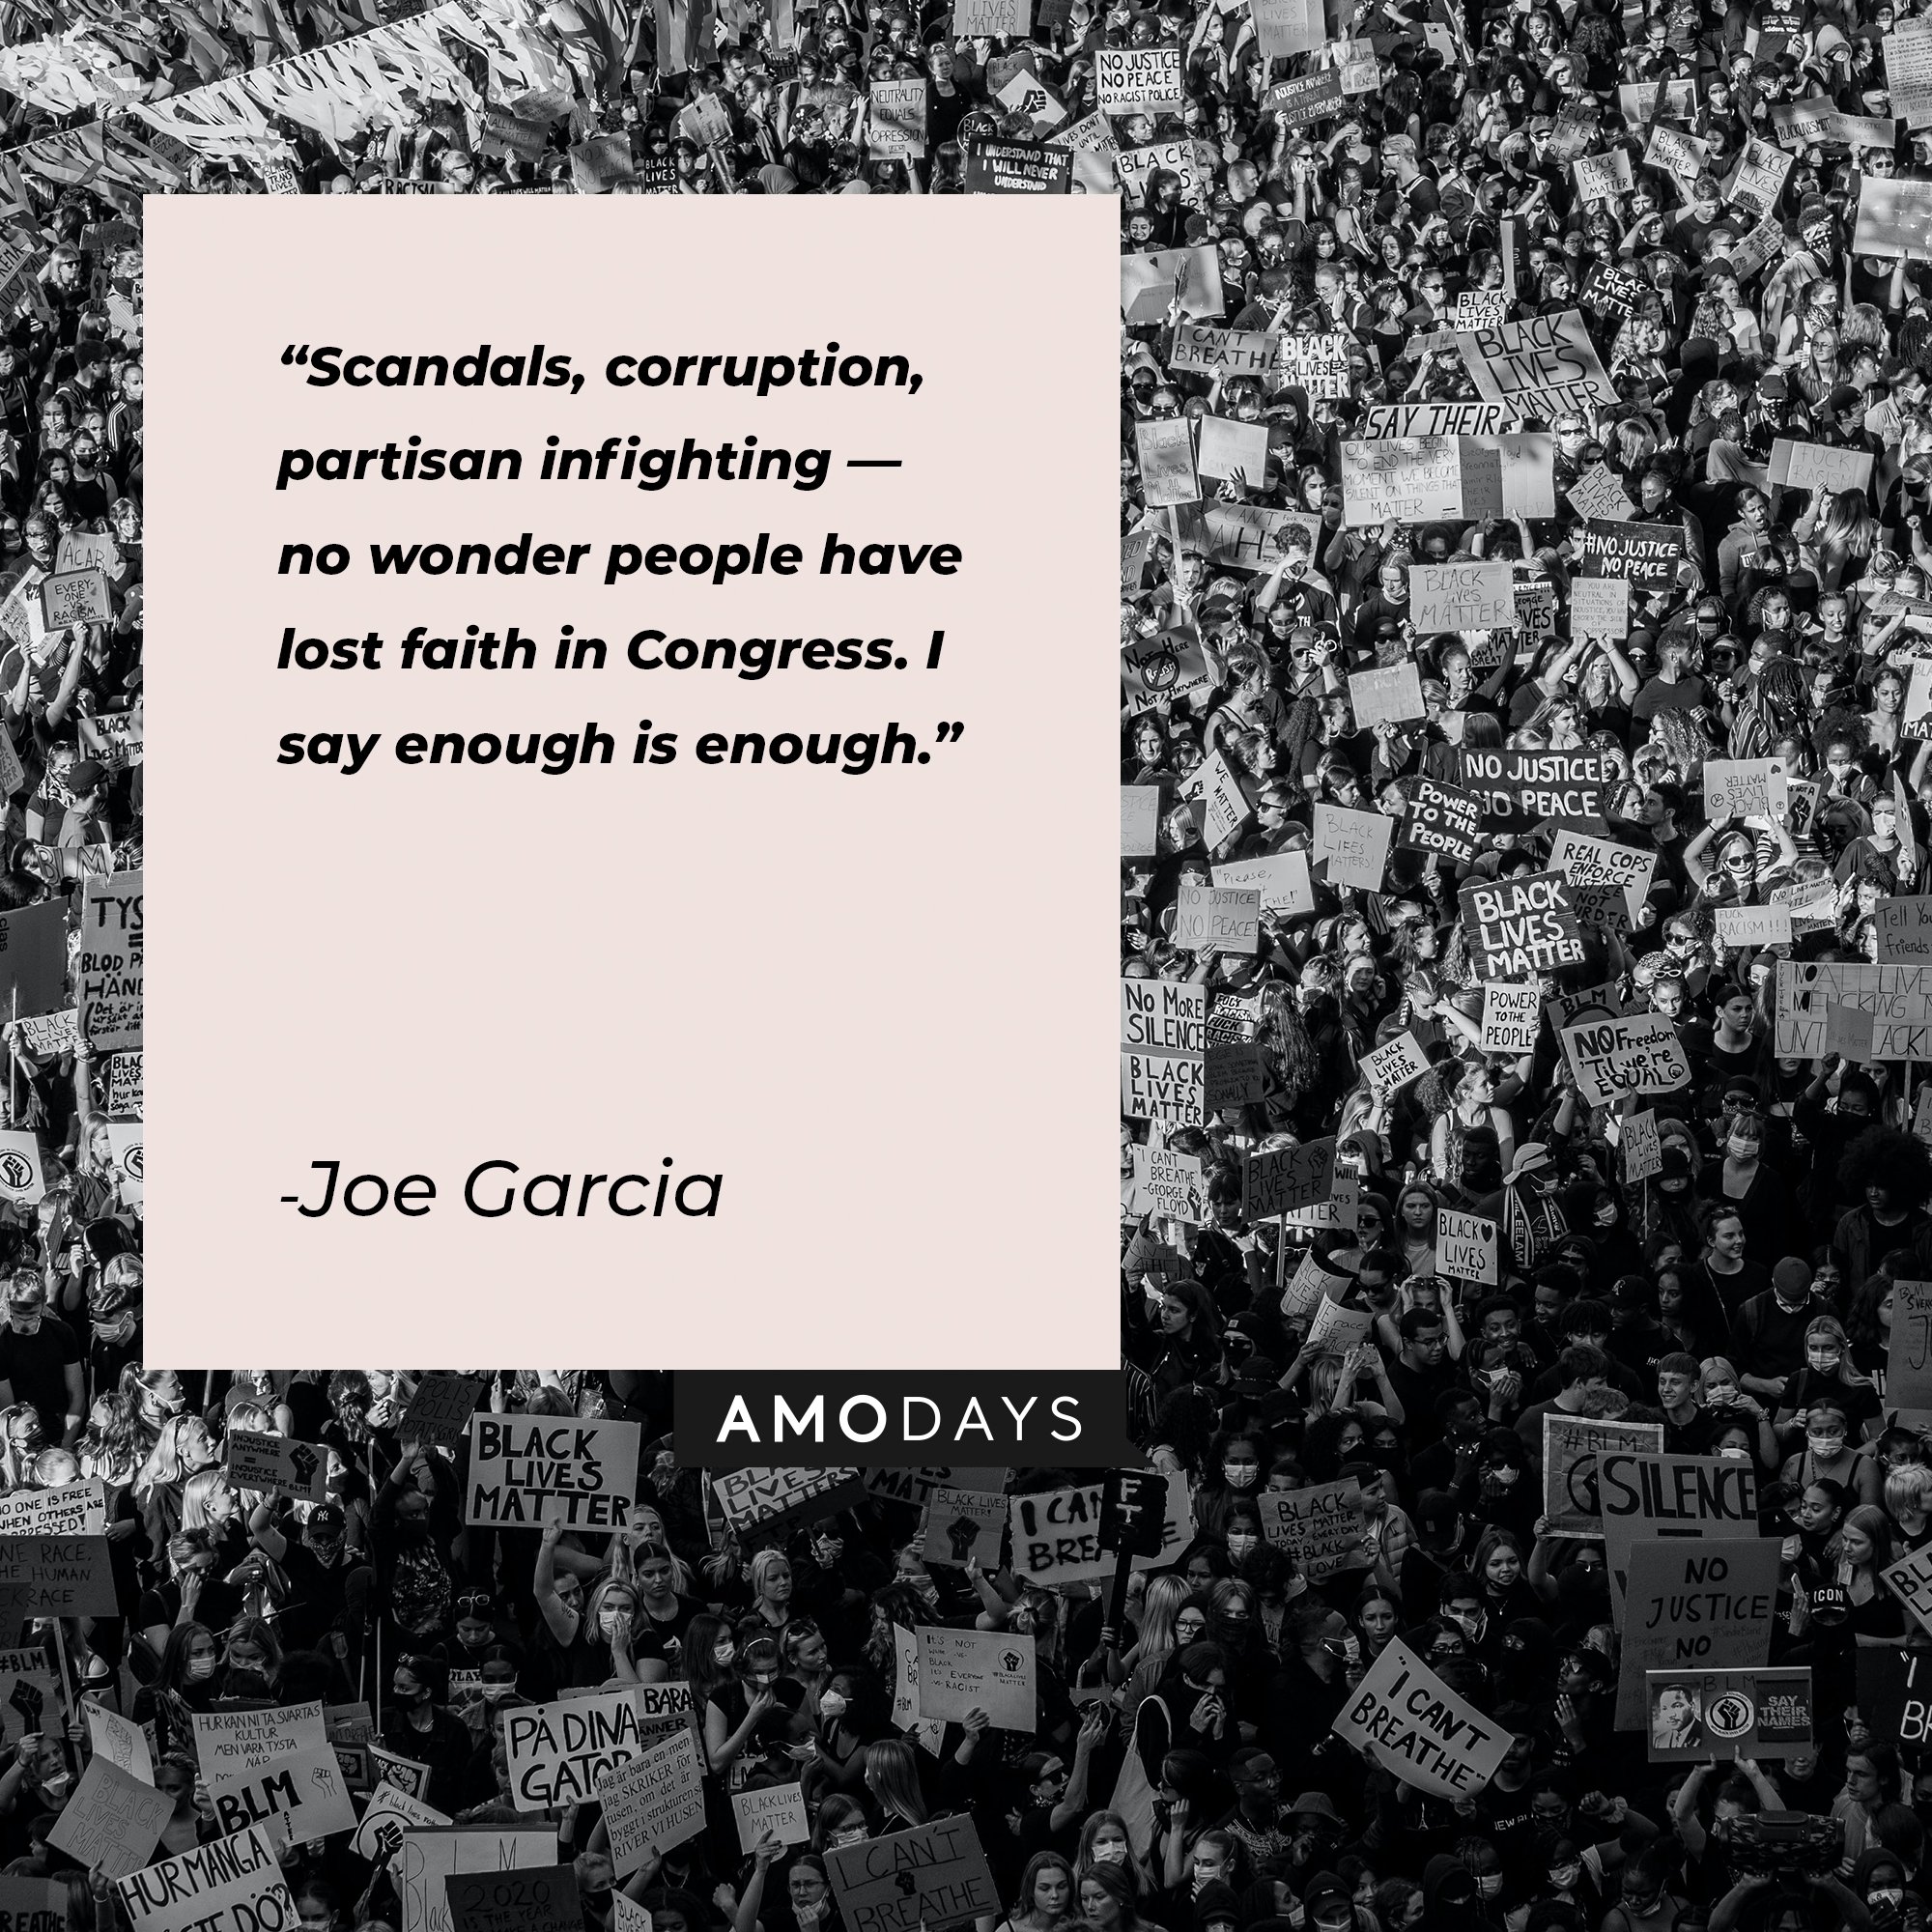 Joe Garcia’s quote: “Scandals, corruption, partisan infighting—no wonder people have lost faith in Congress. I say enough is enough.” | Image: AmoDays 